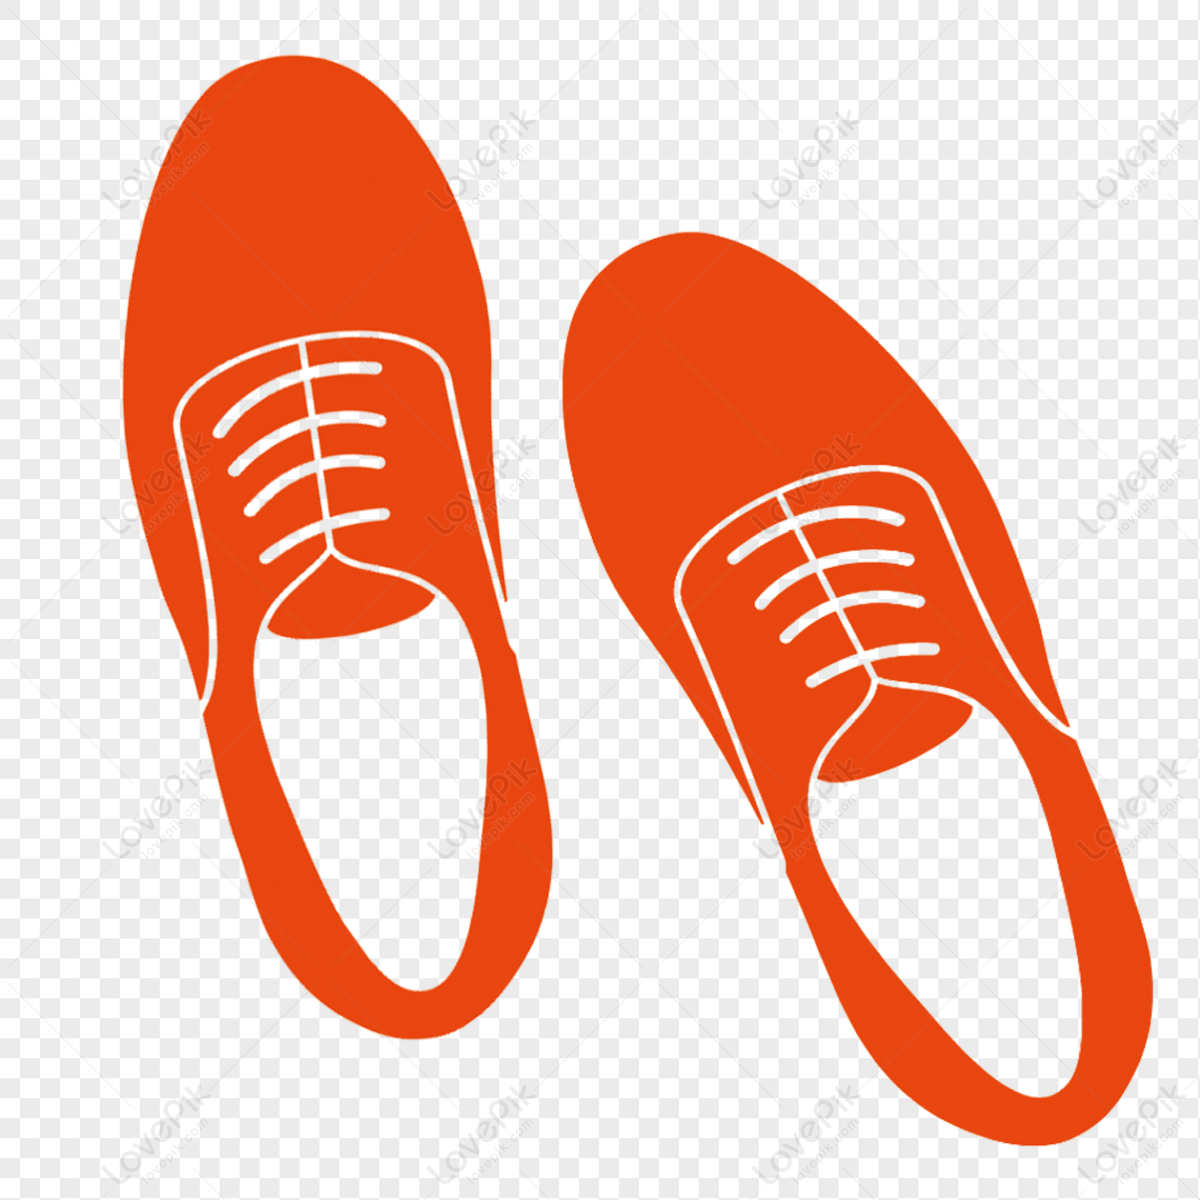 Red Shoes PNG Hd Transparent Image And Clipart Image For Free Download -  Lovepik | 400261484